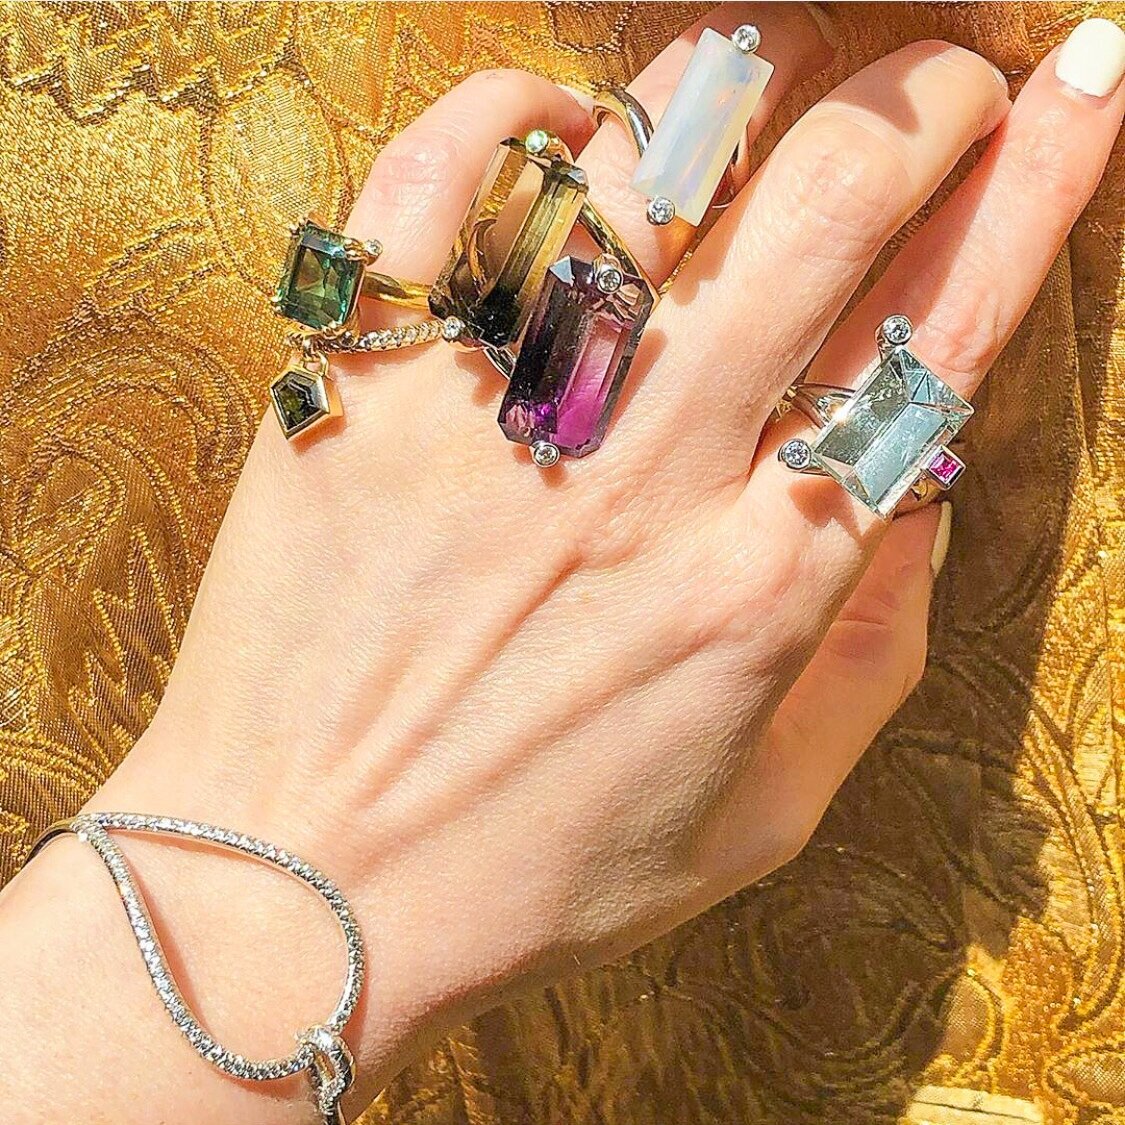 Julie's happy jewelry: her one of a kind statement ring and bespoke pieces